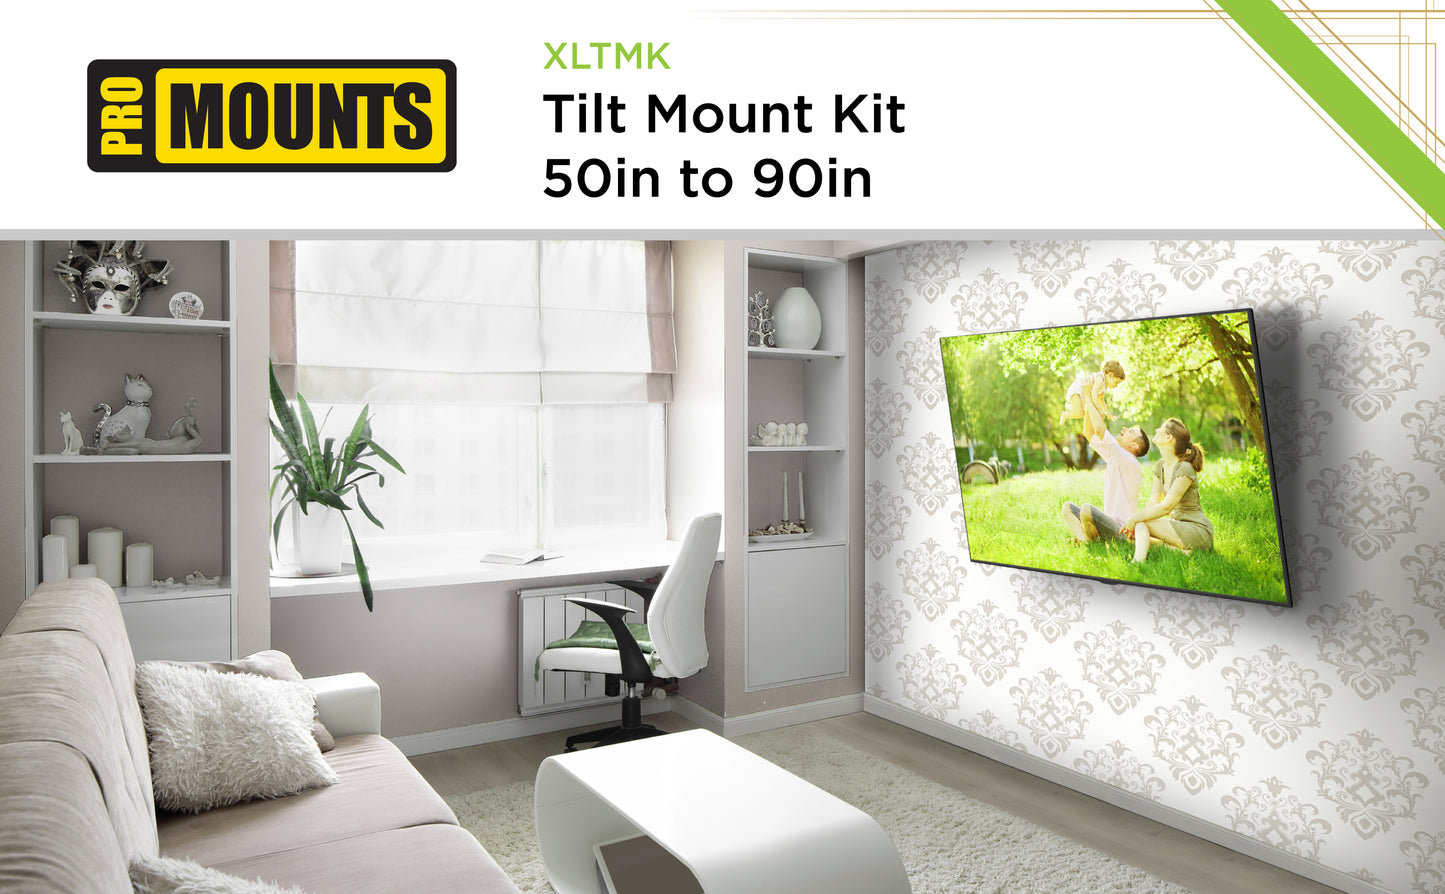 ProMounts Tilt TV Wall Mount Kit (Mount, HDMI, Screen Cleaner) For 50" to 90" TVs up to 165lbs (XLTMK)